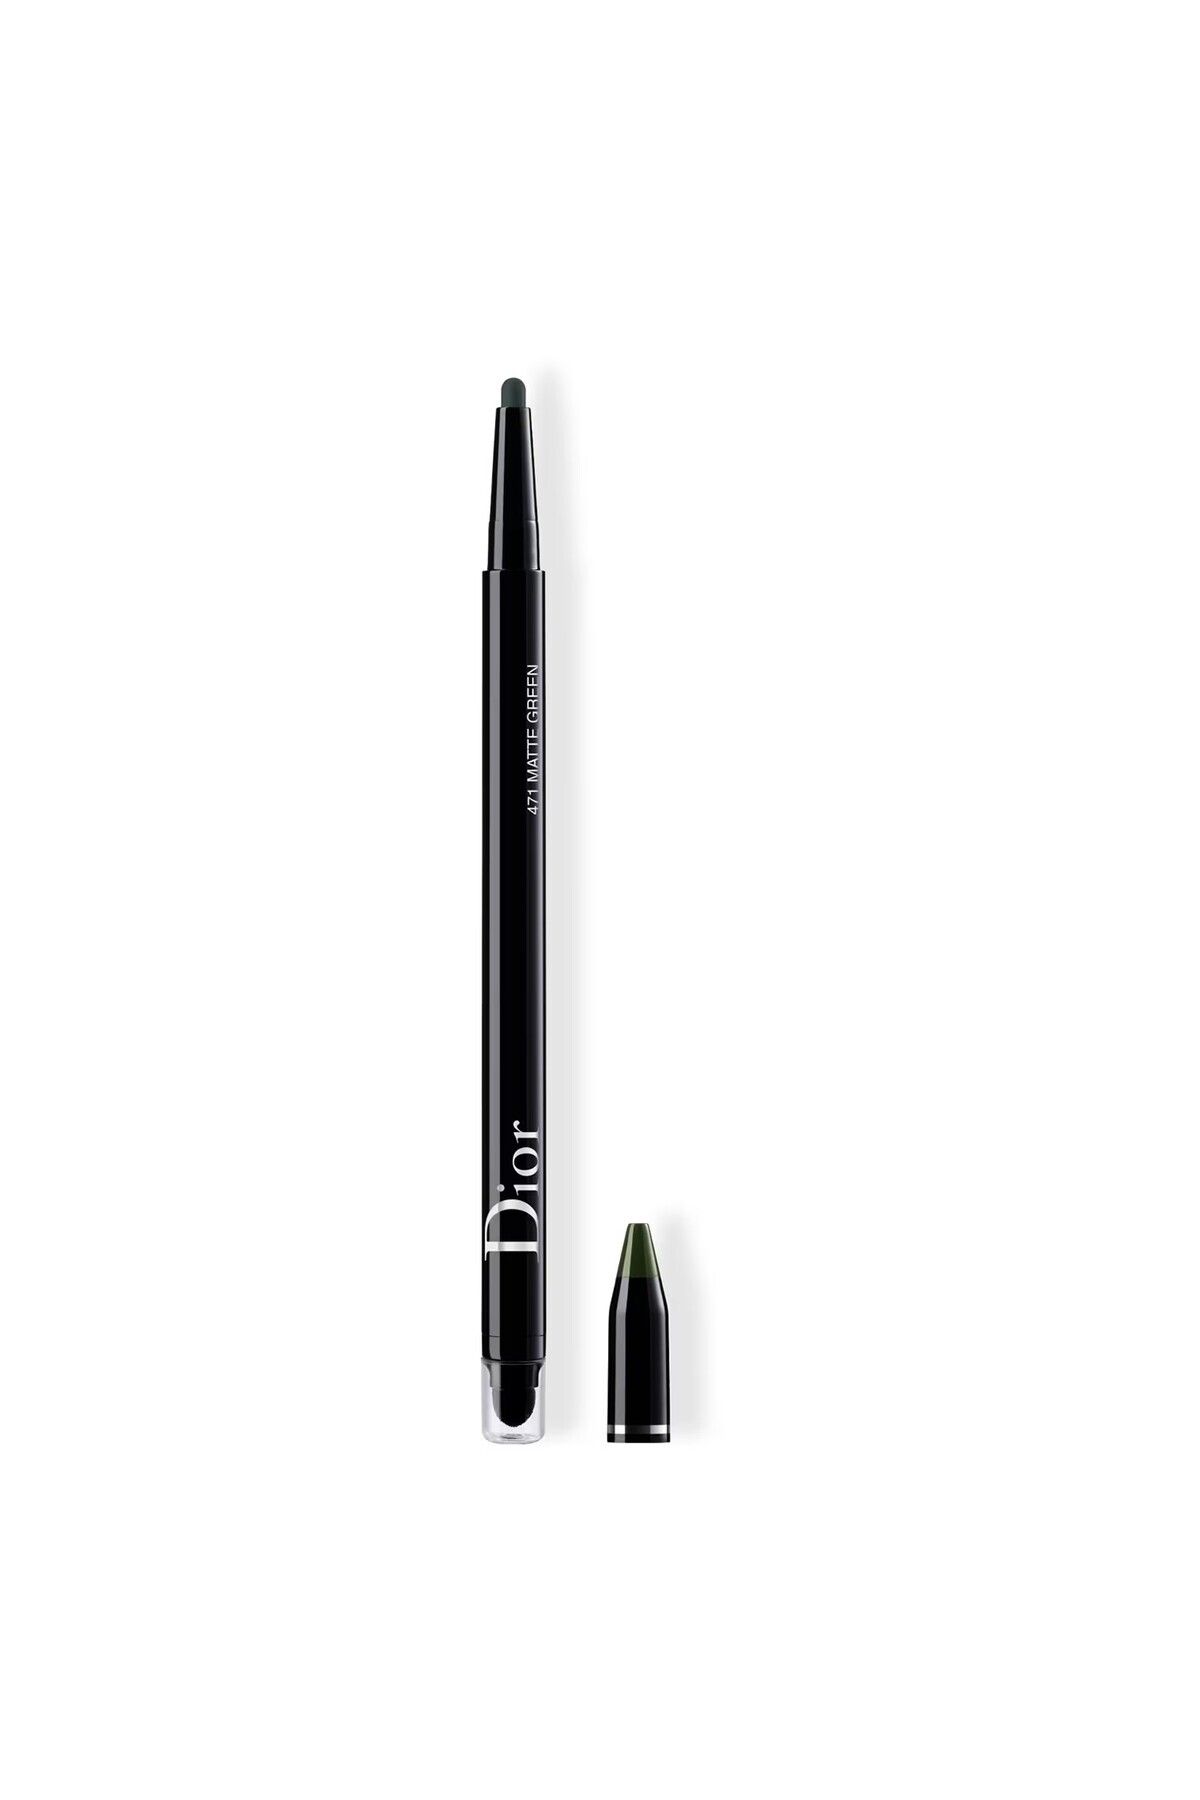 Dior 24H*STYLO WATERPROOF -WEAR-LASTİNG PROTECTİON FOR UP TO 24 HOURS, MATTE EYELİNER PSSN1962